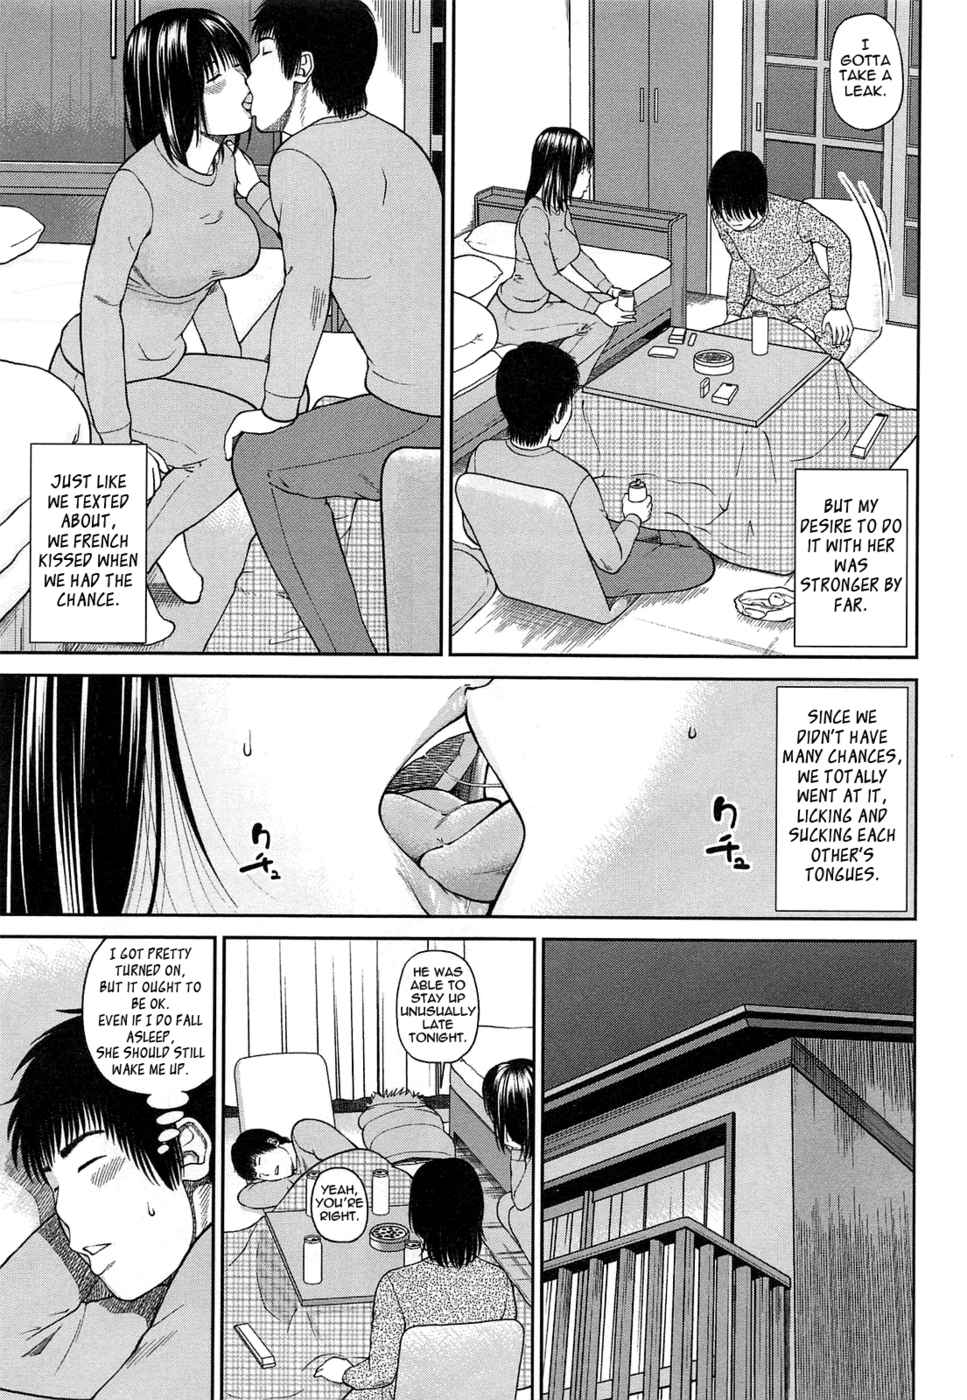 Hentai Manga Comic-35 Year Old Ripe Wife-Chapter 3-The Plan For A Fling With My Friend's Wife-9